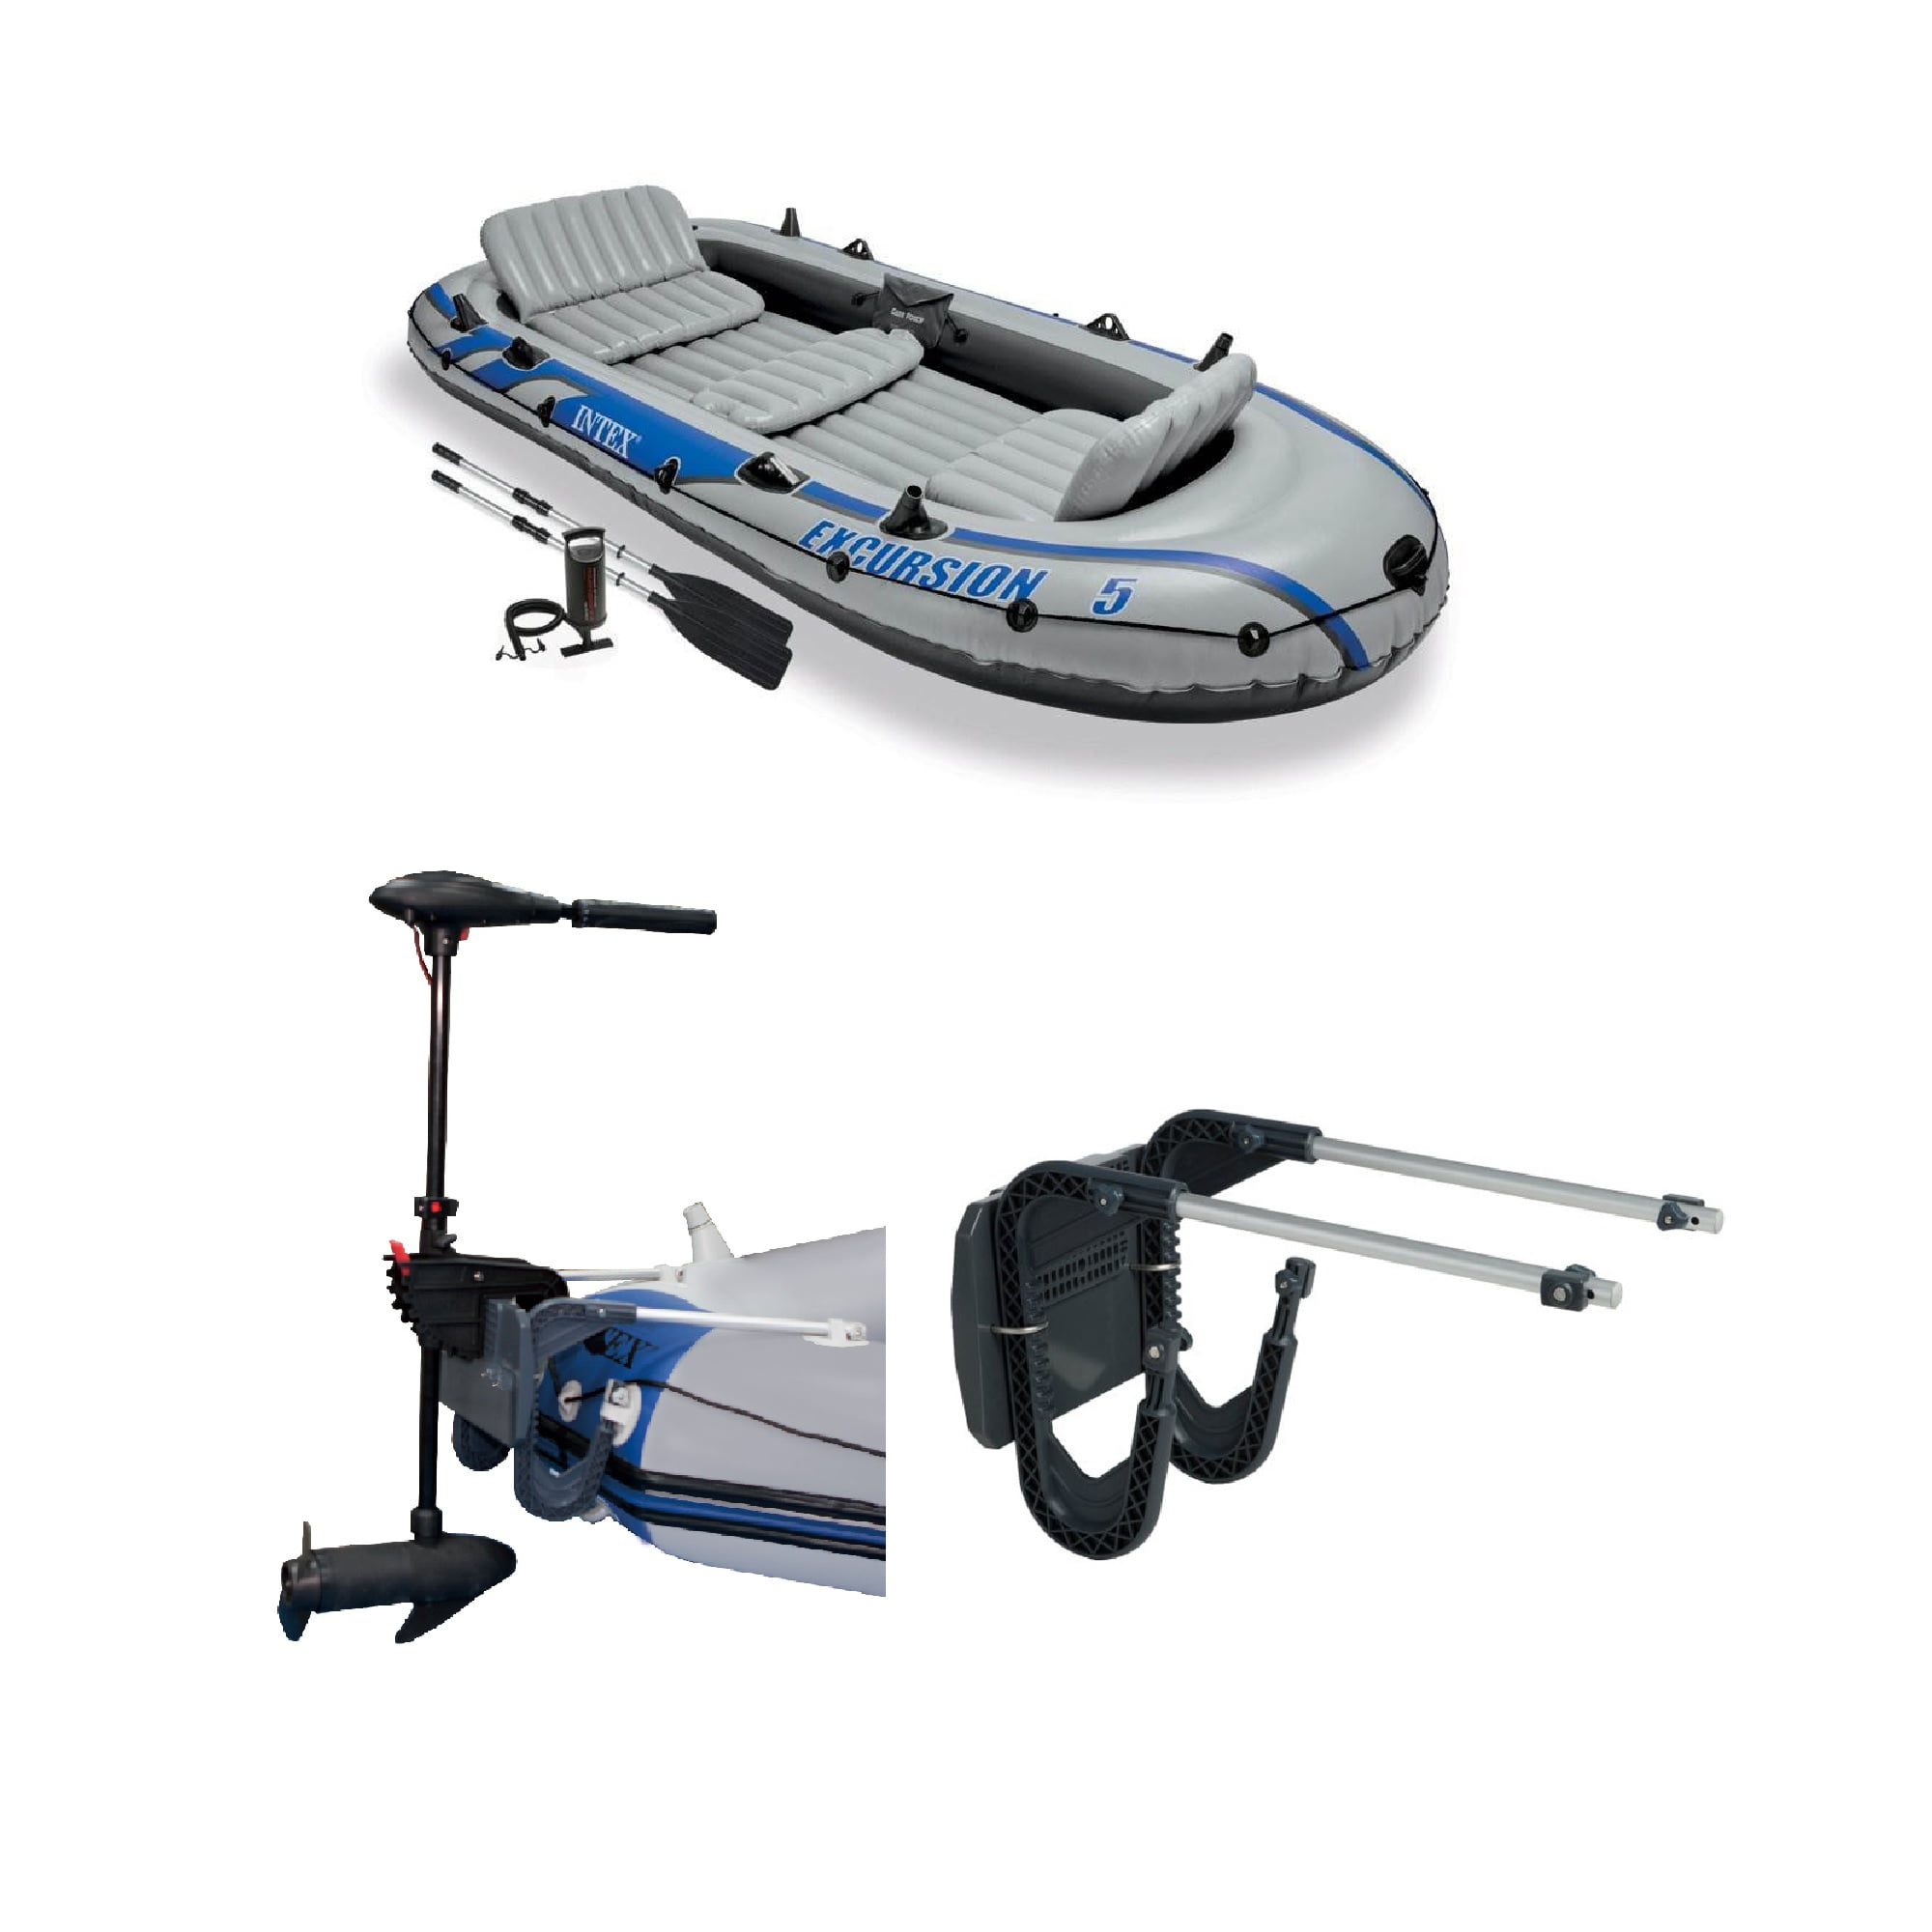 2-4 Person Inflatable Outboard Boat Engine Raft Fishing mount KIT 6.6/7.5/8.8ft 